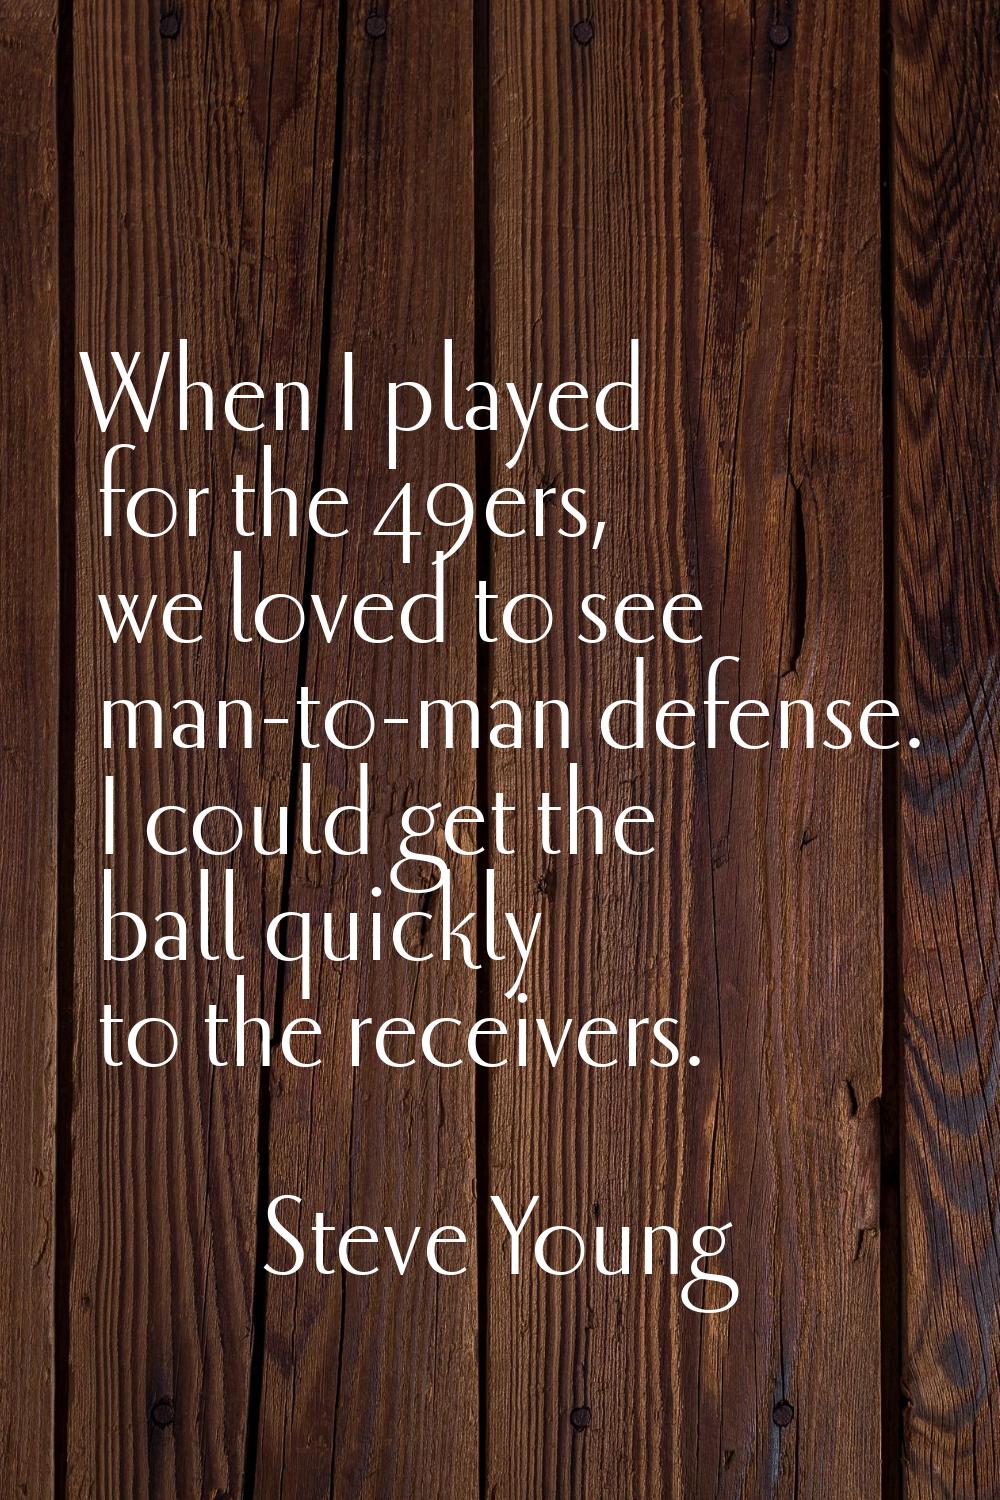 When I played for the 49ers, we loved to see man-to-man defense. I could get the ball quickly to th